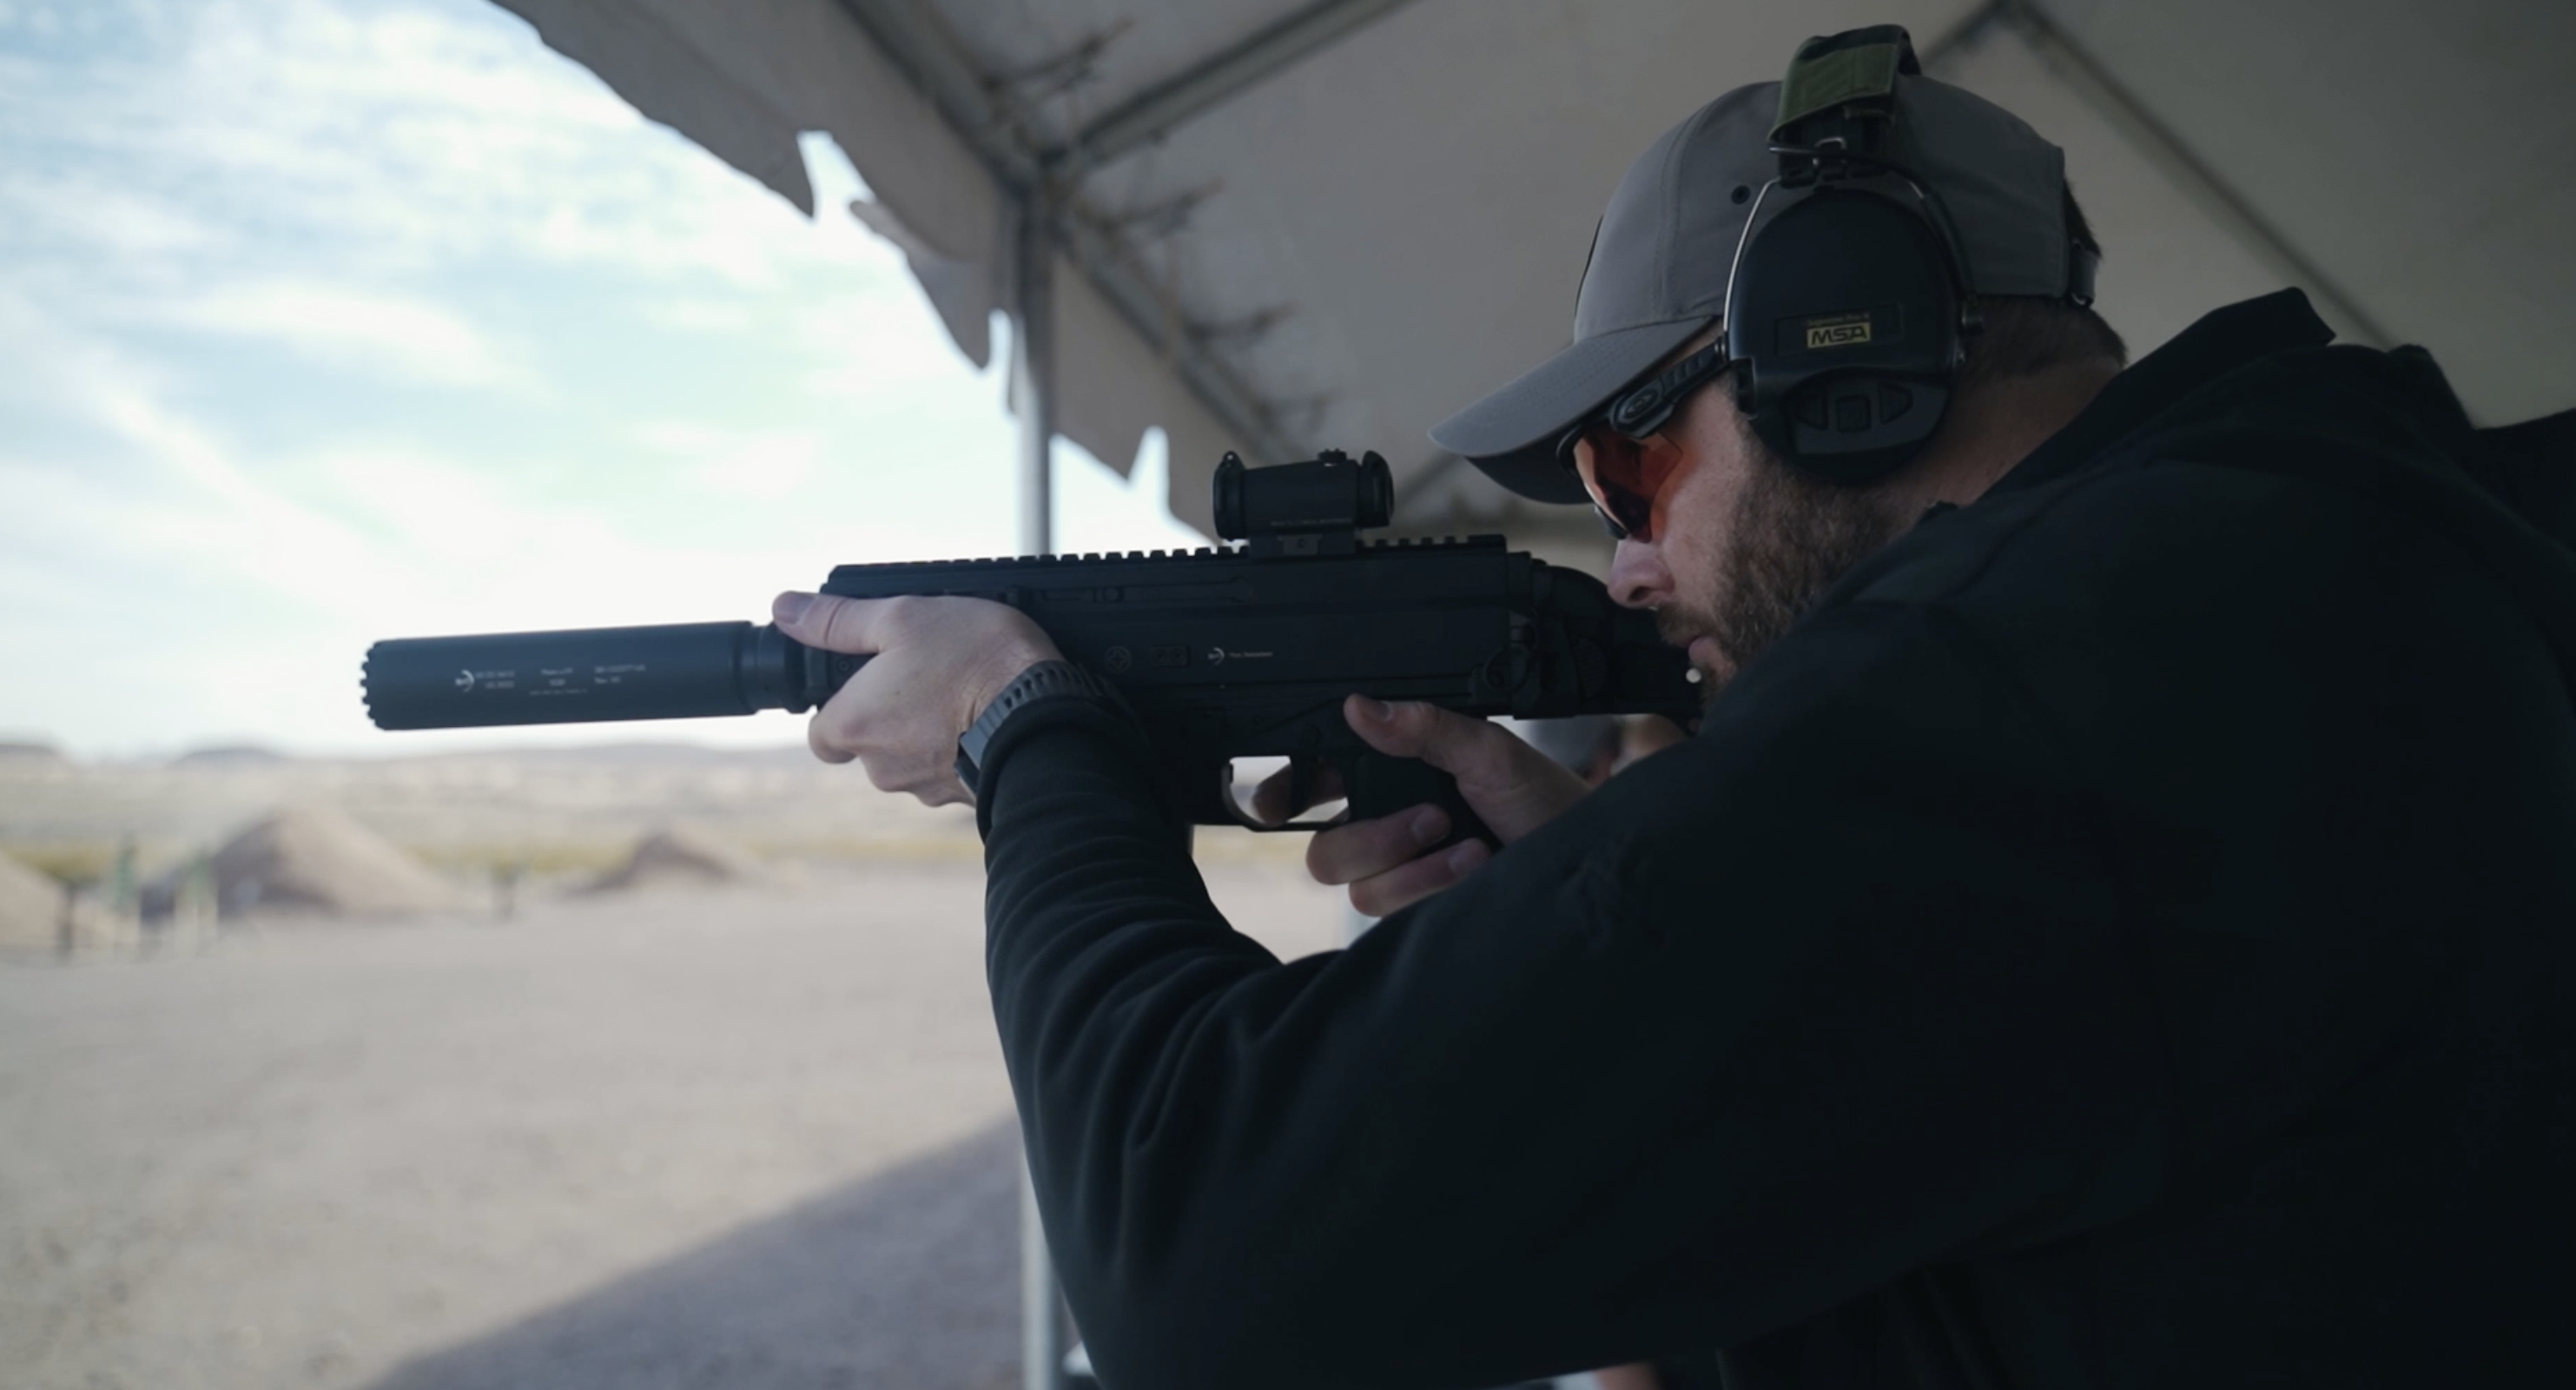 The B&T RBS-9 SQD Suppressor is easy to attach and detach.